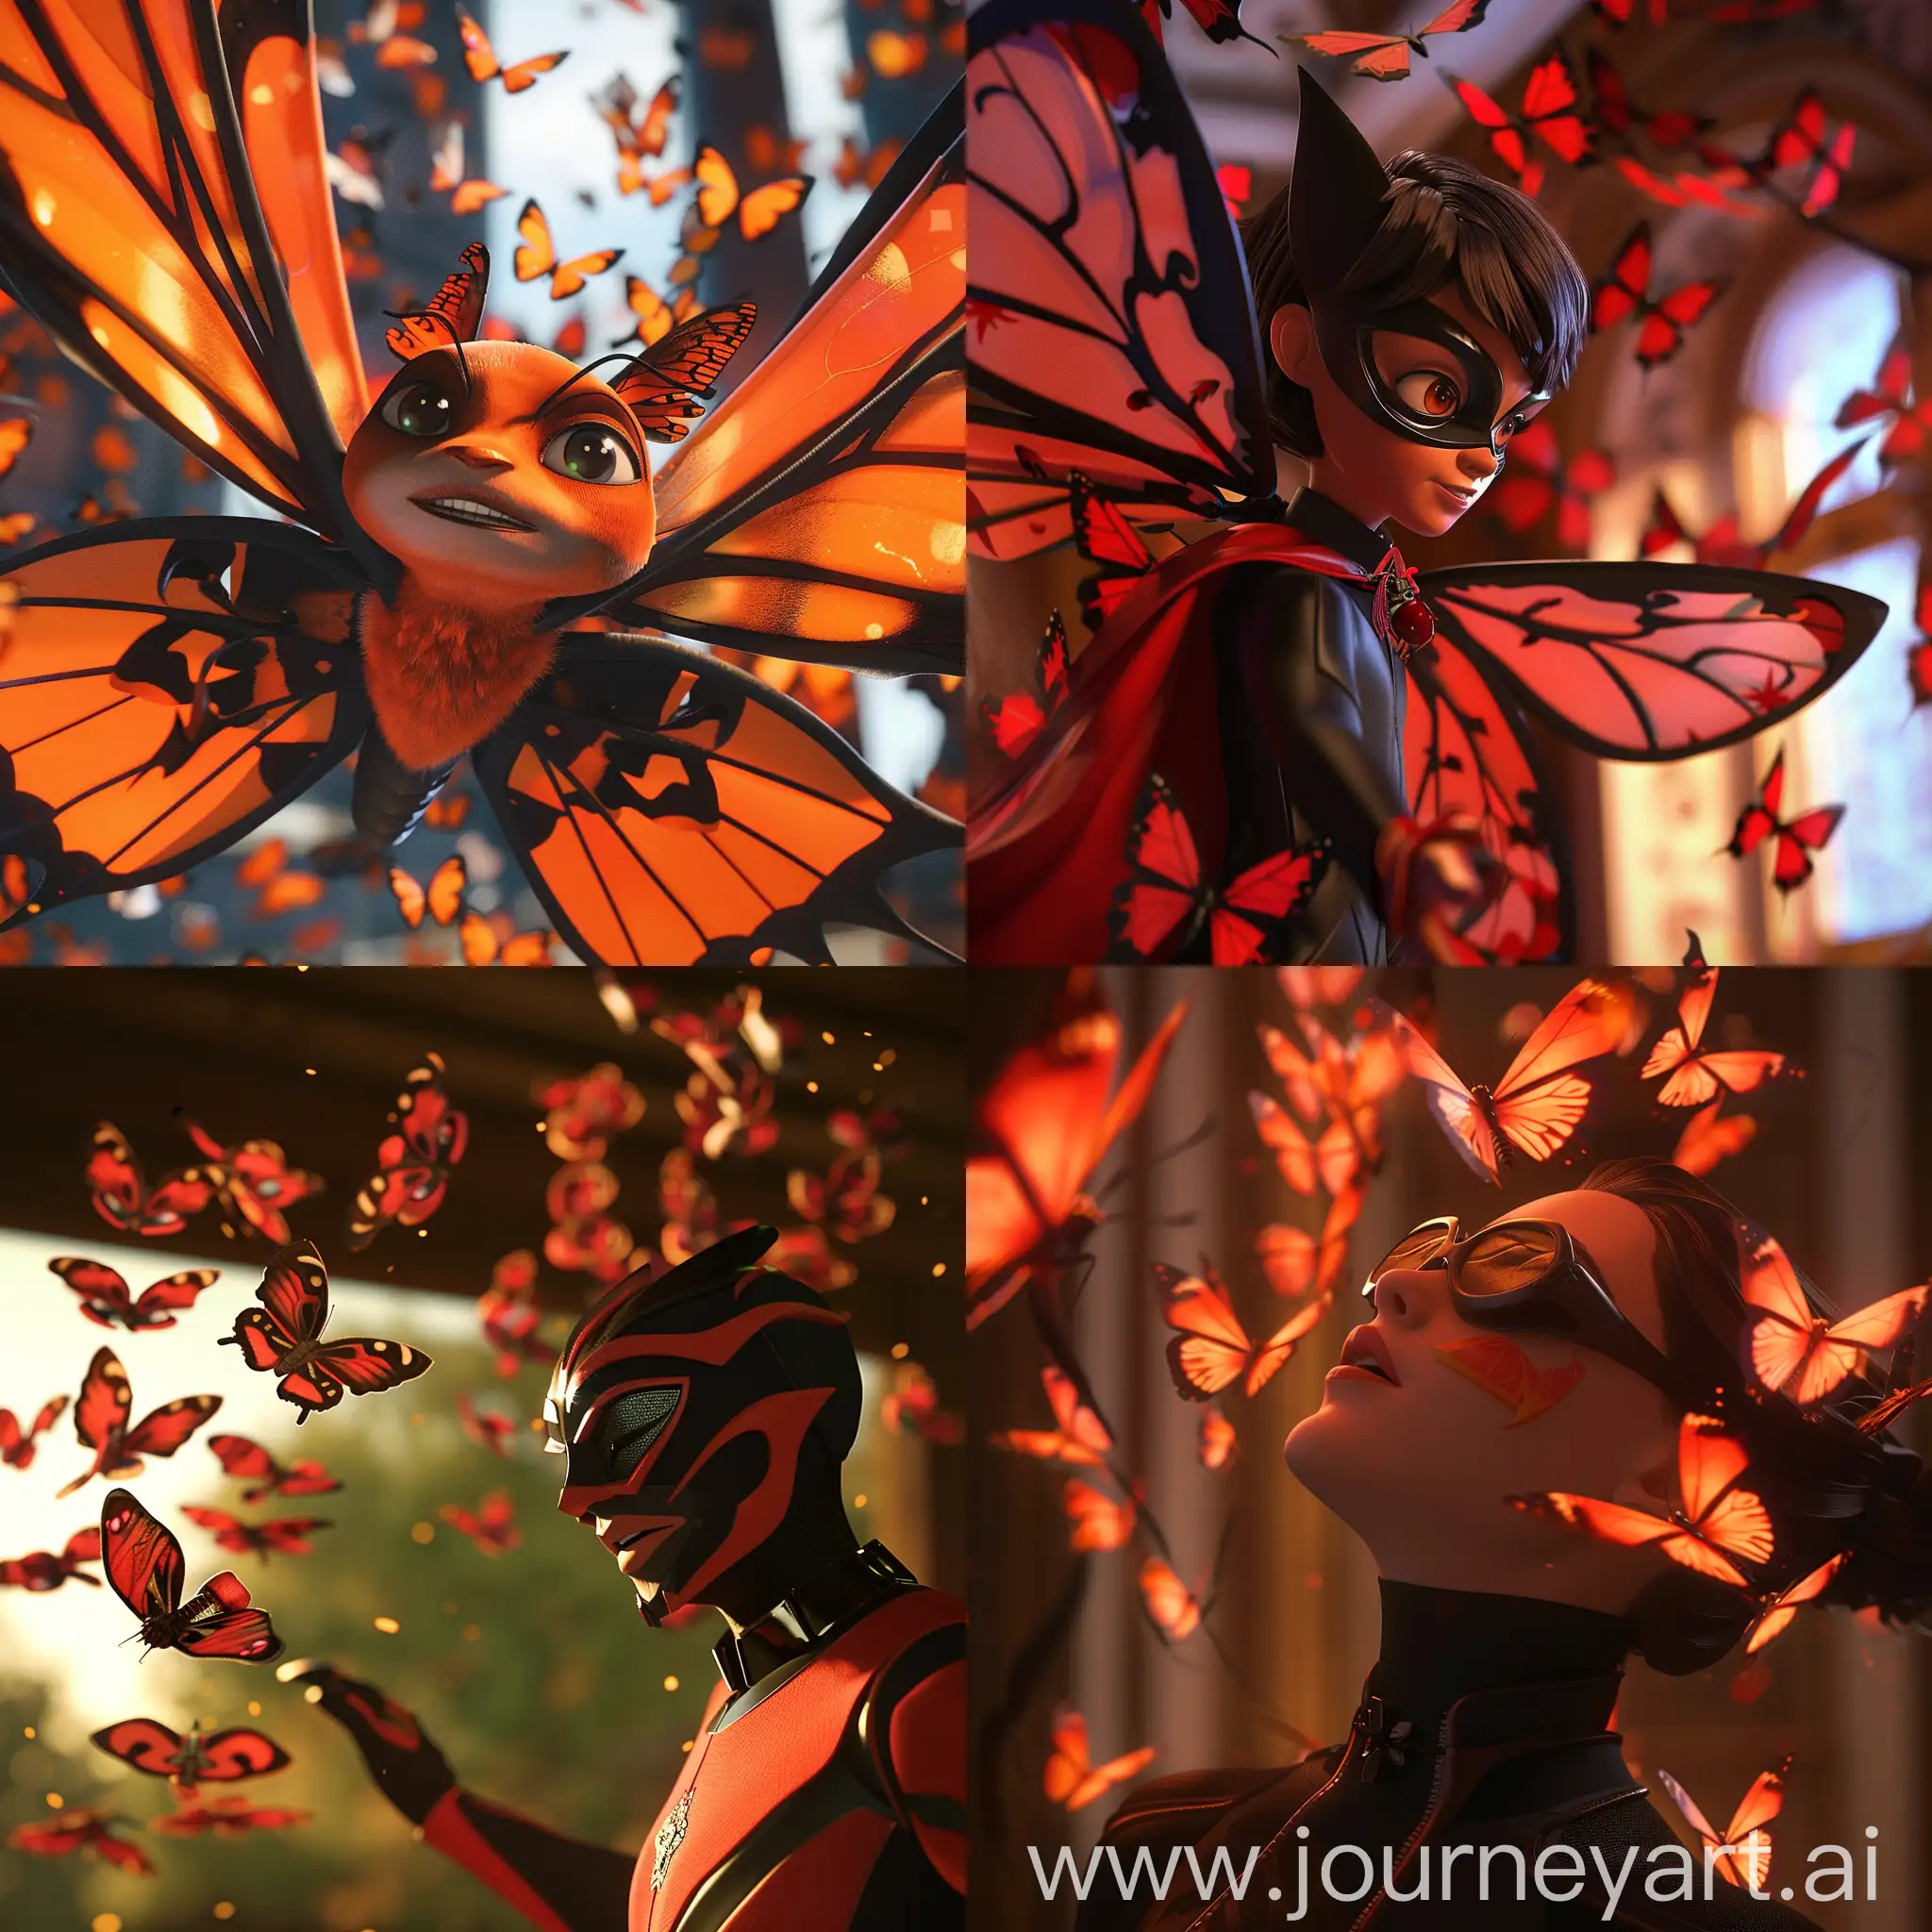 in the tv serie miraculous there is a character named Hawk Moth that releases hakuma butterfly.